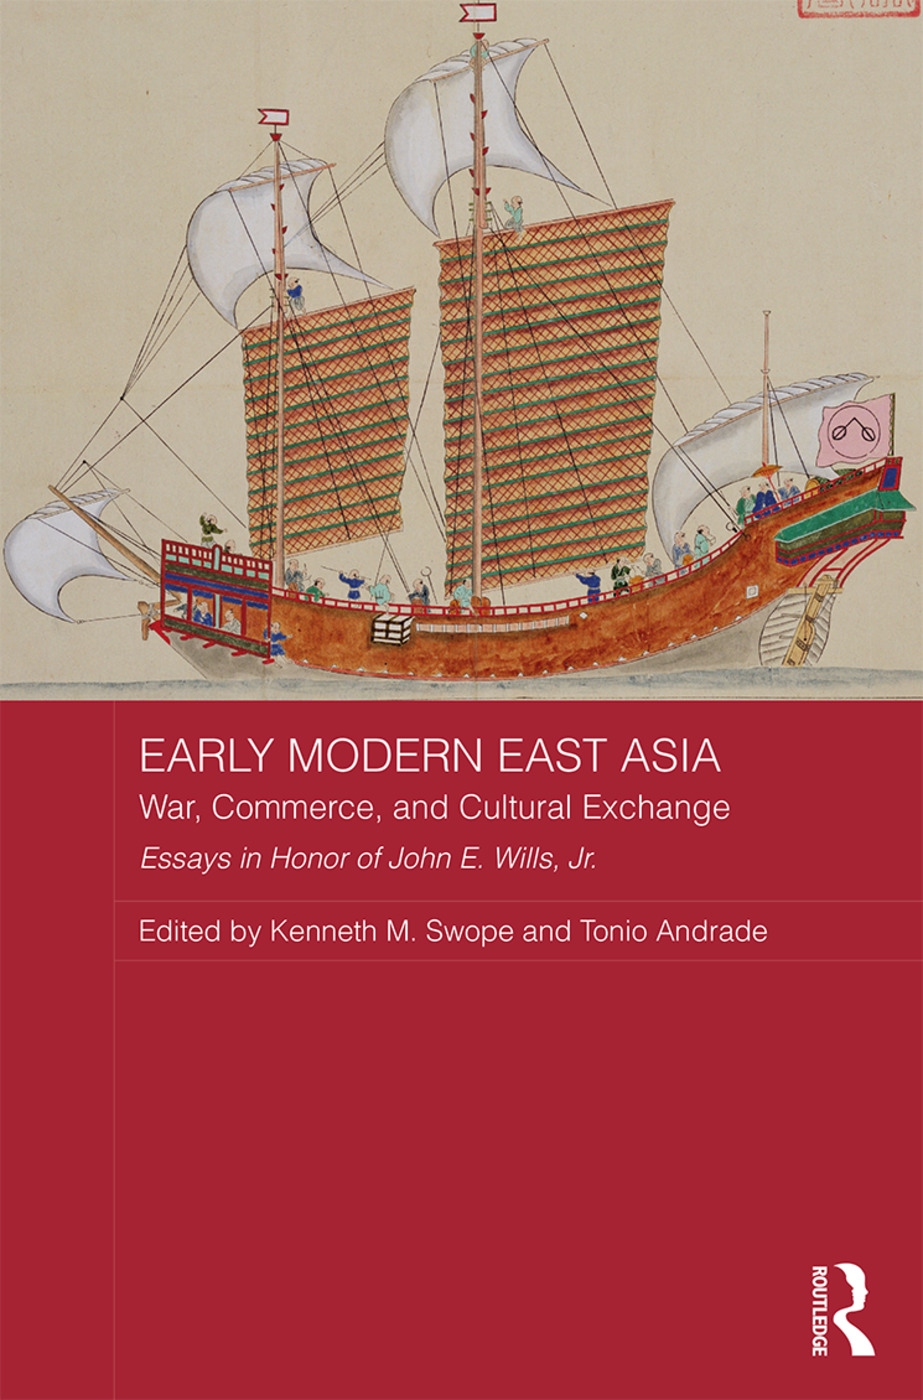 Early Modern East Asia: War, Commerce, and Cultural Exchange: Essays in Honor of John E. Willis, Jr.